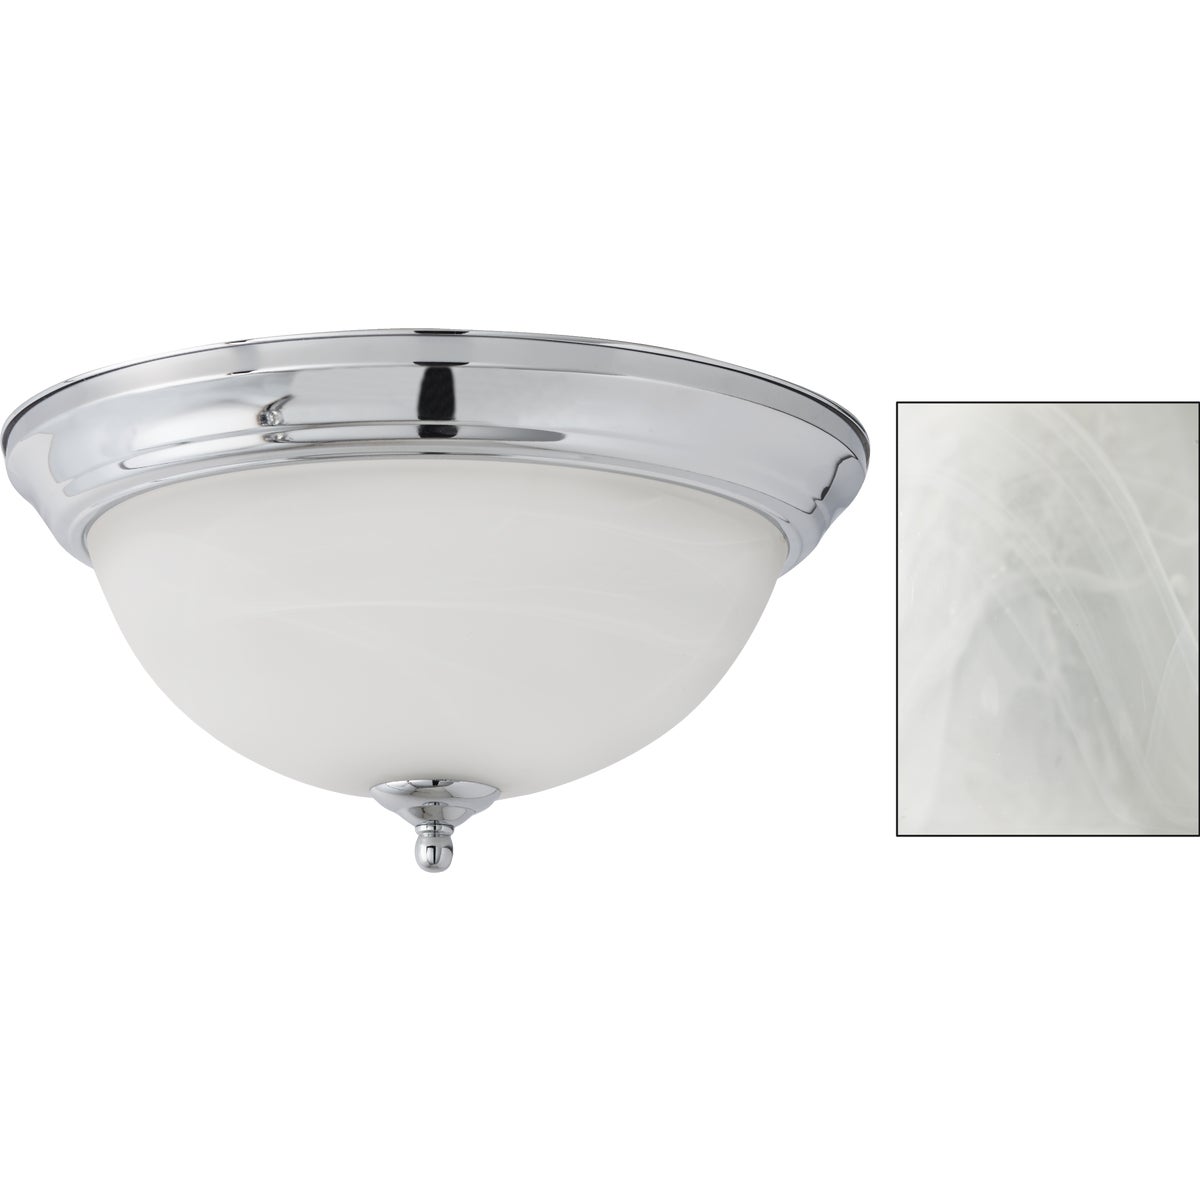 Home Impressions 13 In. Chrome Flush Mount Incandescent Ceiling Light Fixture with Alabaster Glass